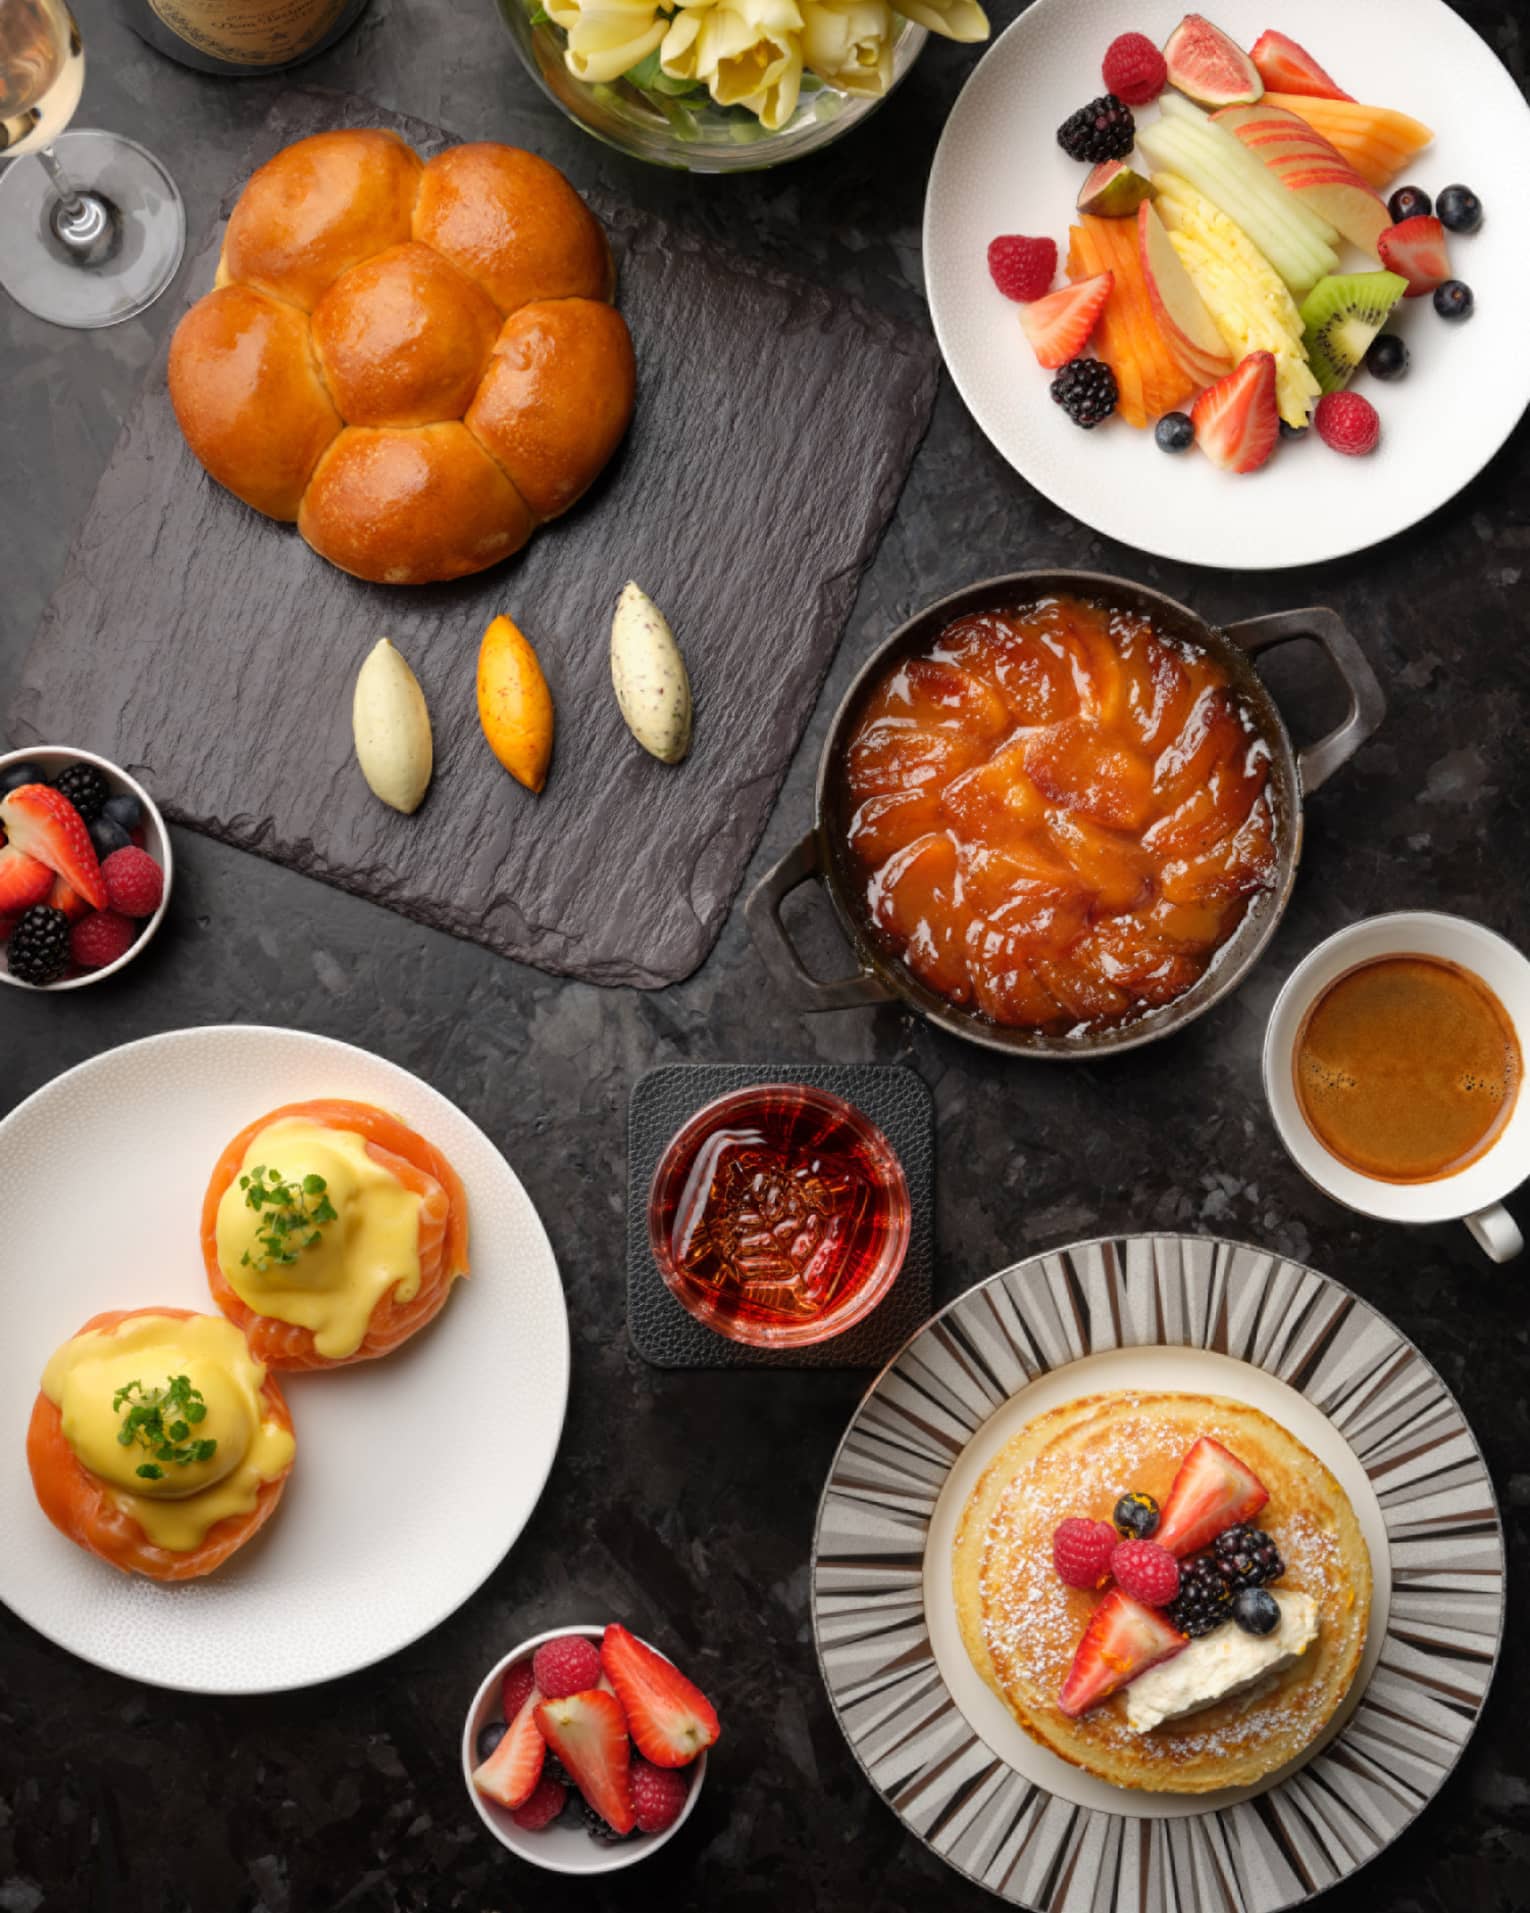 Brunch plates with pastries, fruits, pancakes and coffees on black table